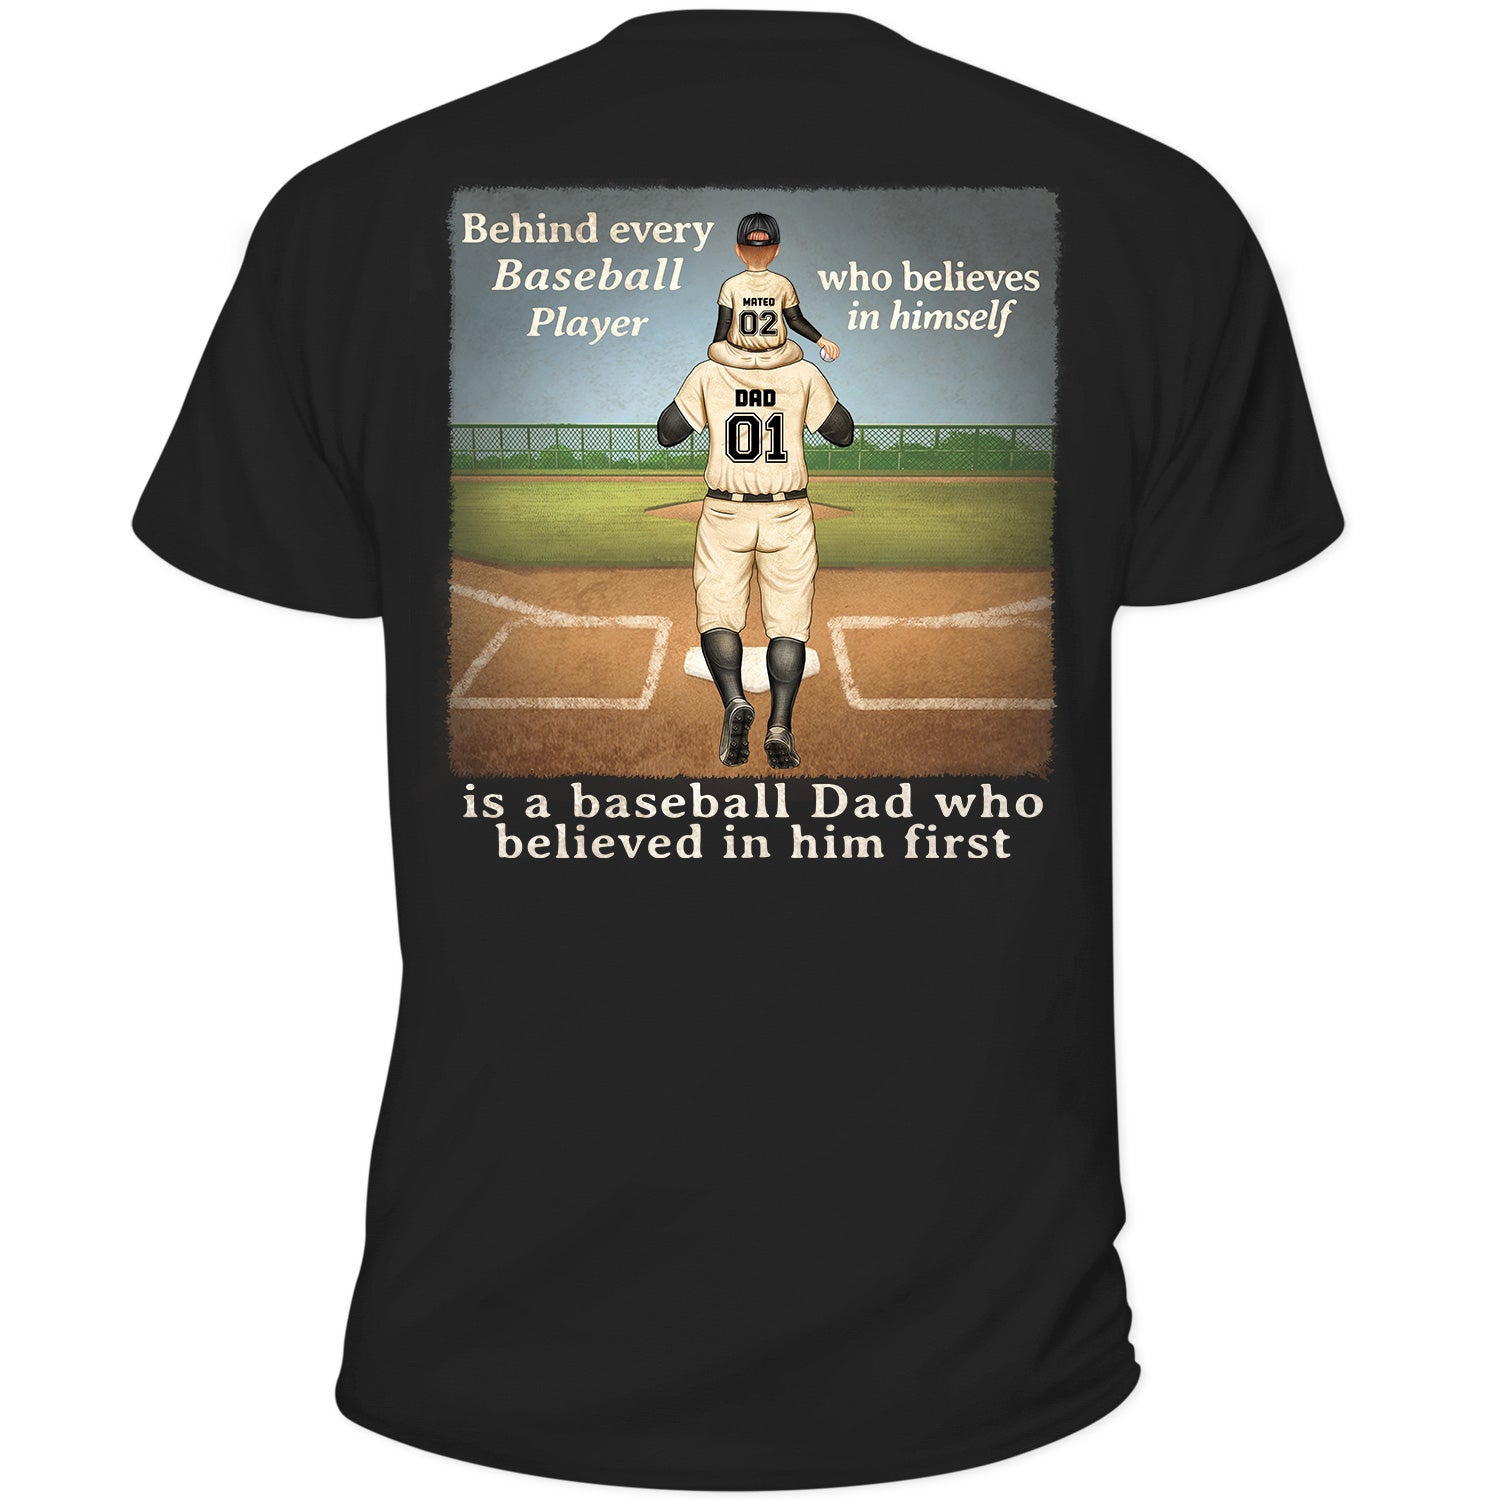 Every Baseball Softball Player Who Believes In - Birthday, Loving Gift For Sport Fan, Dad, Father - Personalized Custom T Shirt